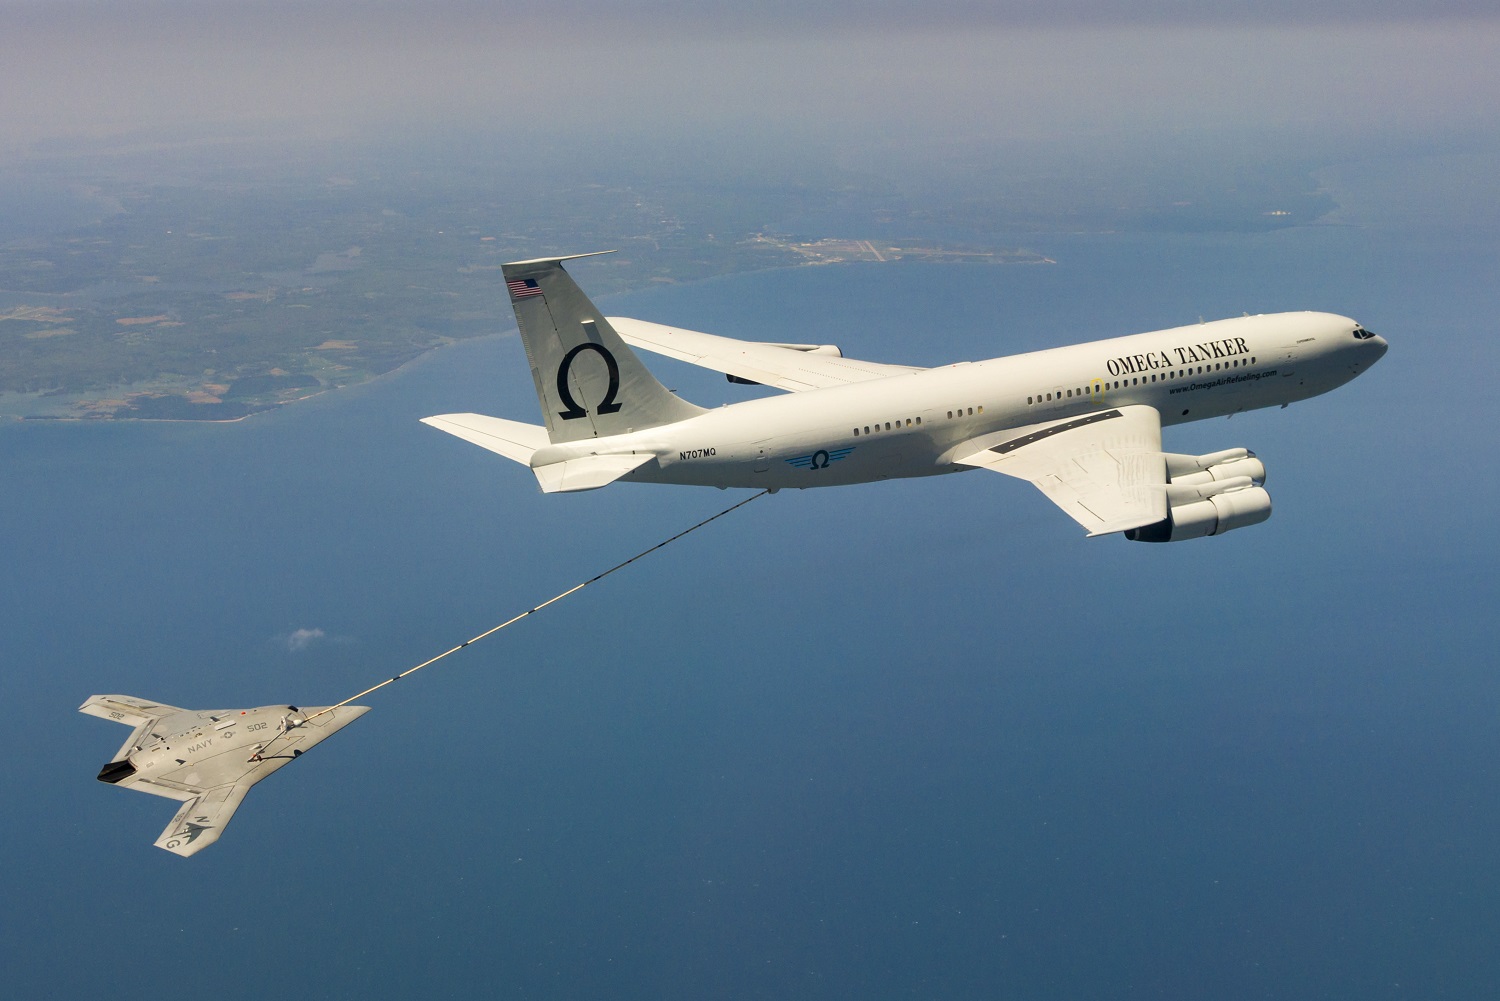 PATUXENT RIVER, Md. (April 22, 2015) The Navy's unmanned X-47B receives fuel from an Omega K-707 tanker while operating in the Atlantic Test Ranges over the Chesapeake Bay. This test marked the first time an unmanned aircraft refueled in flight. U.S. Navy photo.
